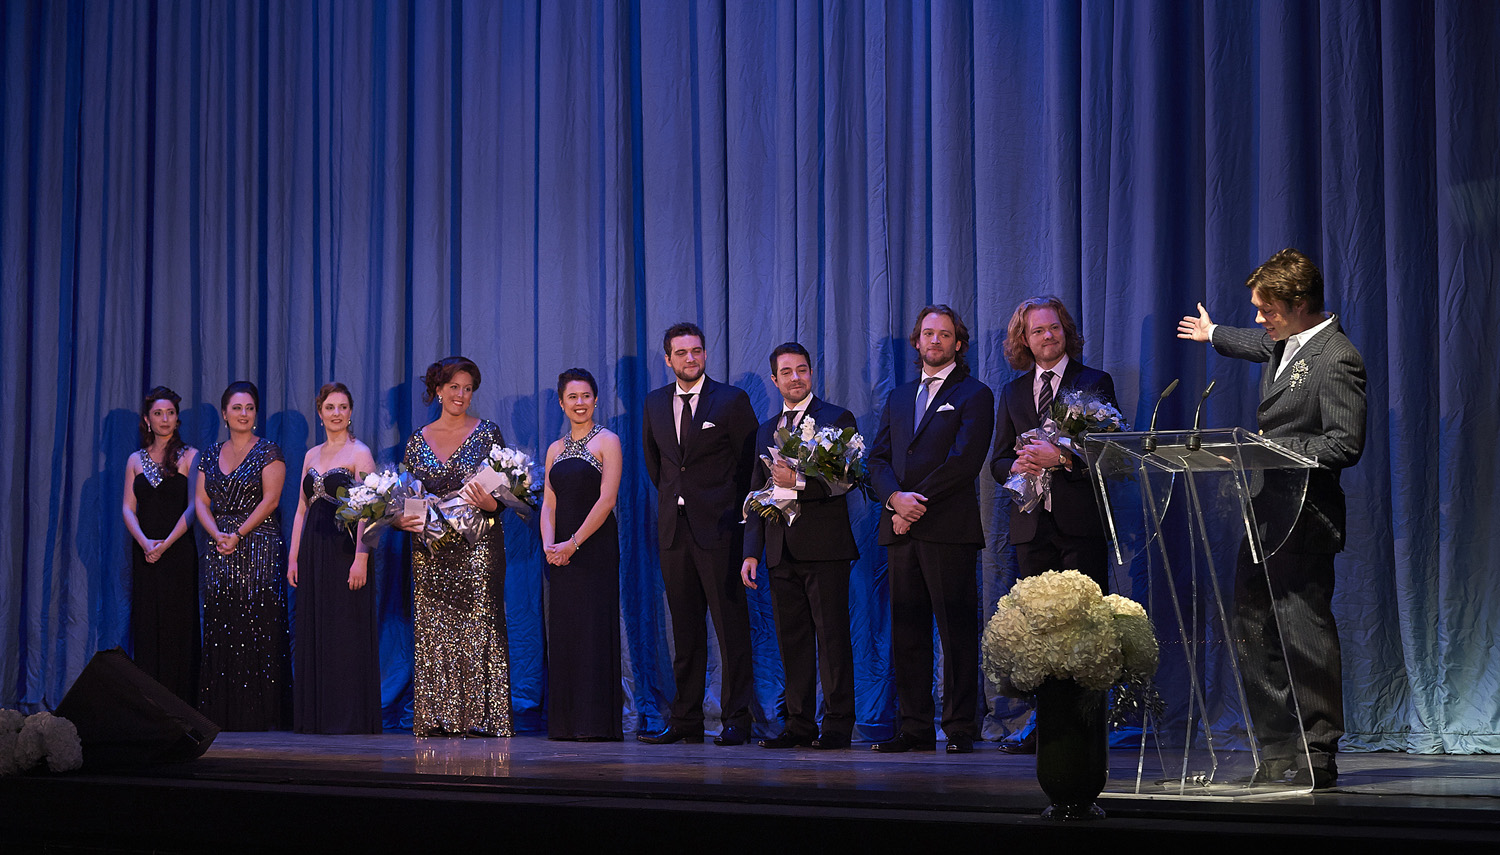 Ensemble Studio Competition finalists and winners with Centre Stage host Rufus Wainwright, 2013. Photo: Michael Cooper